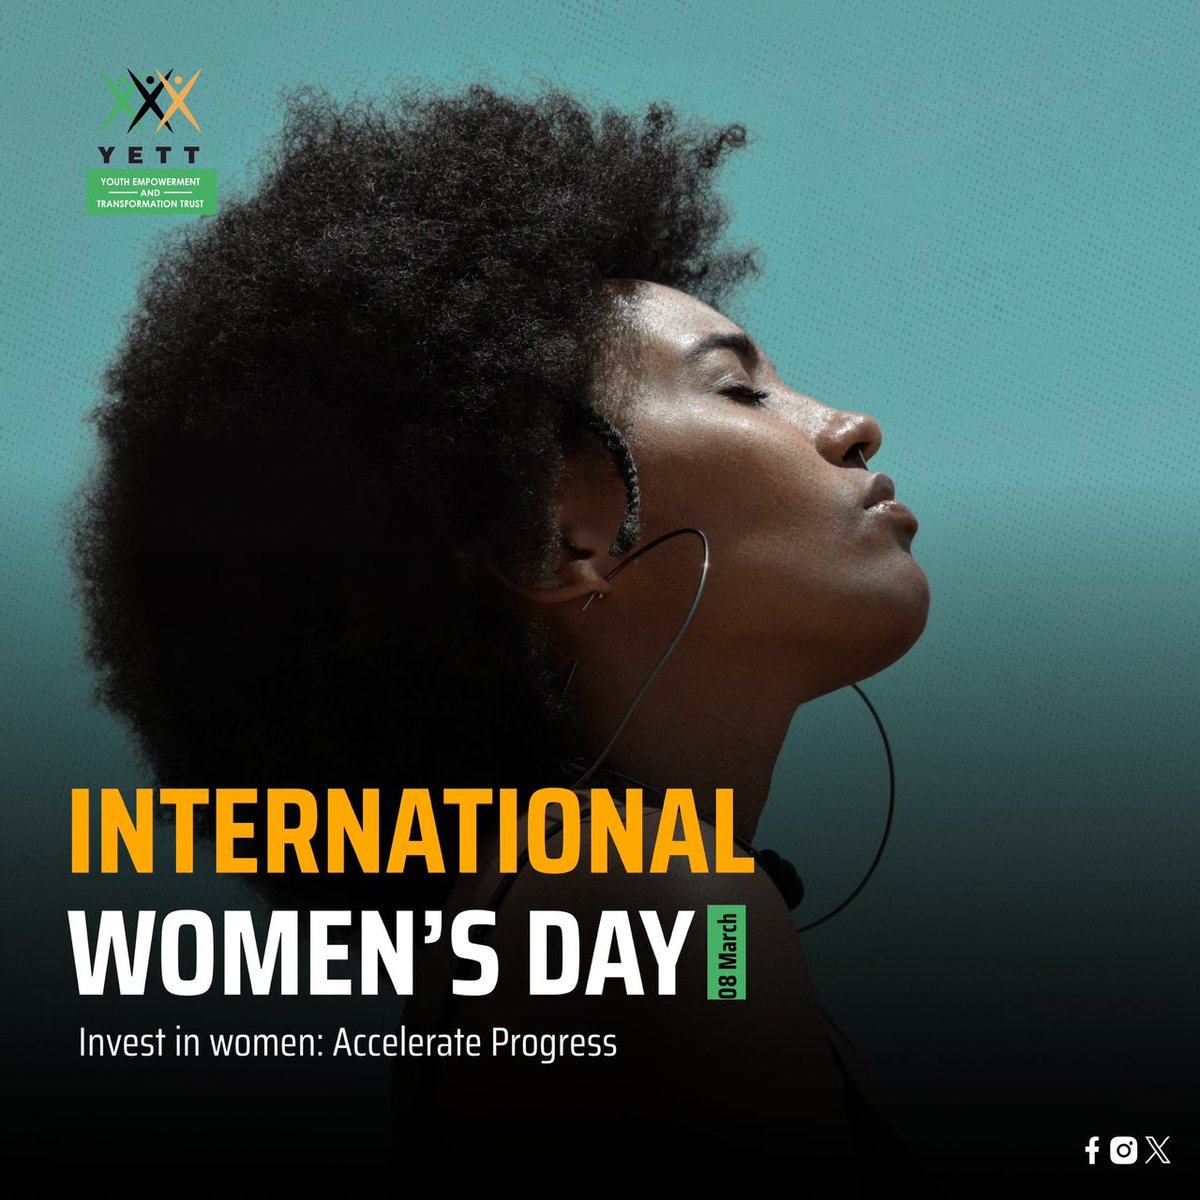 Today, we celebrate the incredible women who have paved the way for others. Our commitment to investing in young women is unwavering, and we will continue to empower them through our programs for sustainable development. #InvestInWomenAccelerateProgress